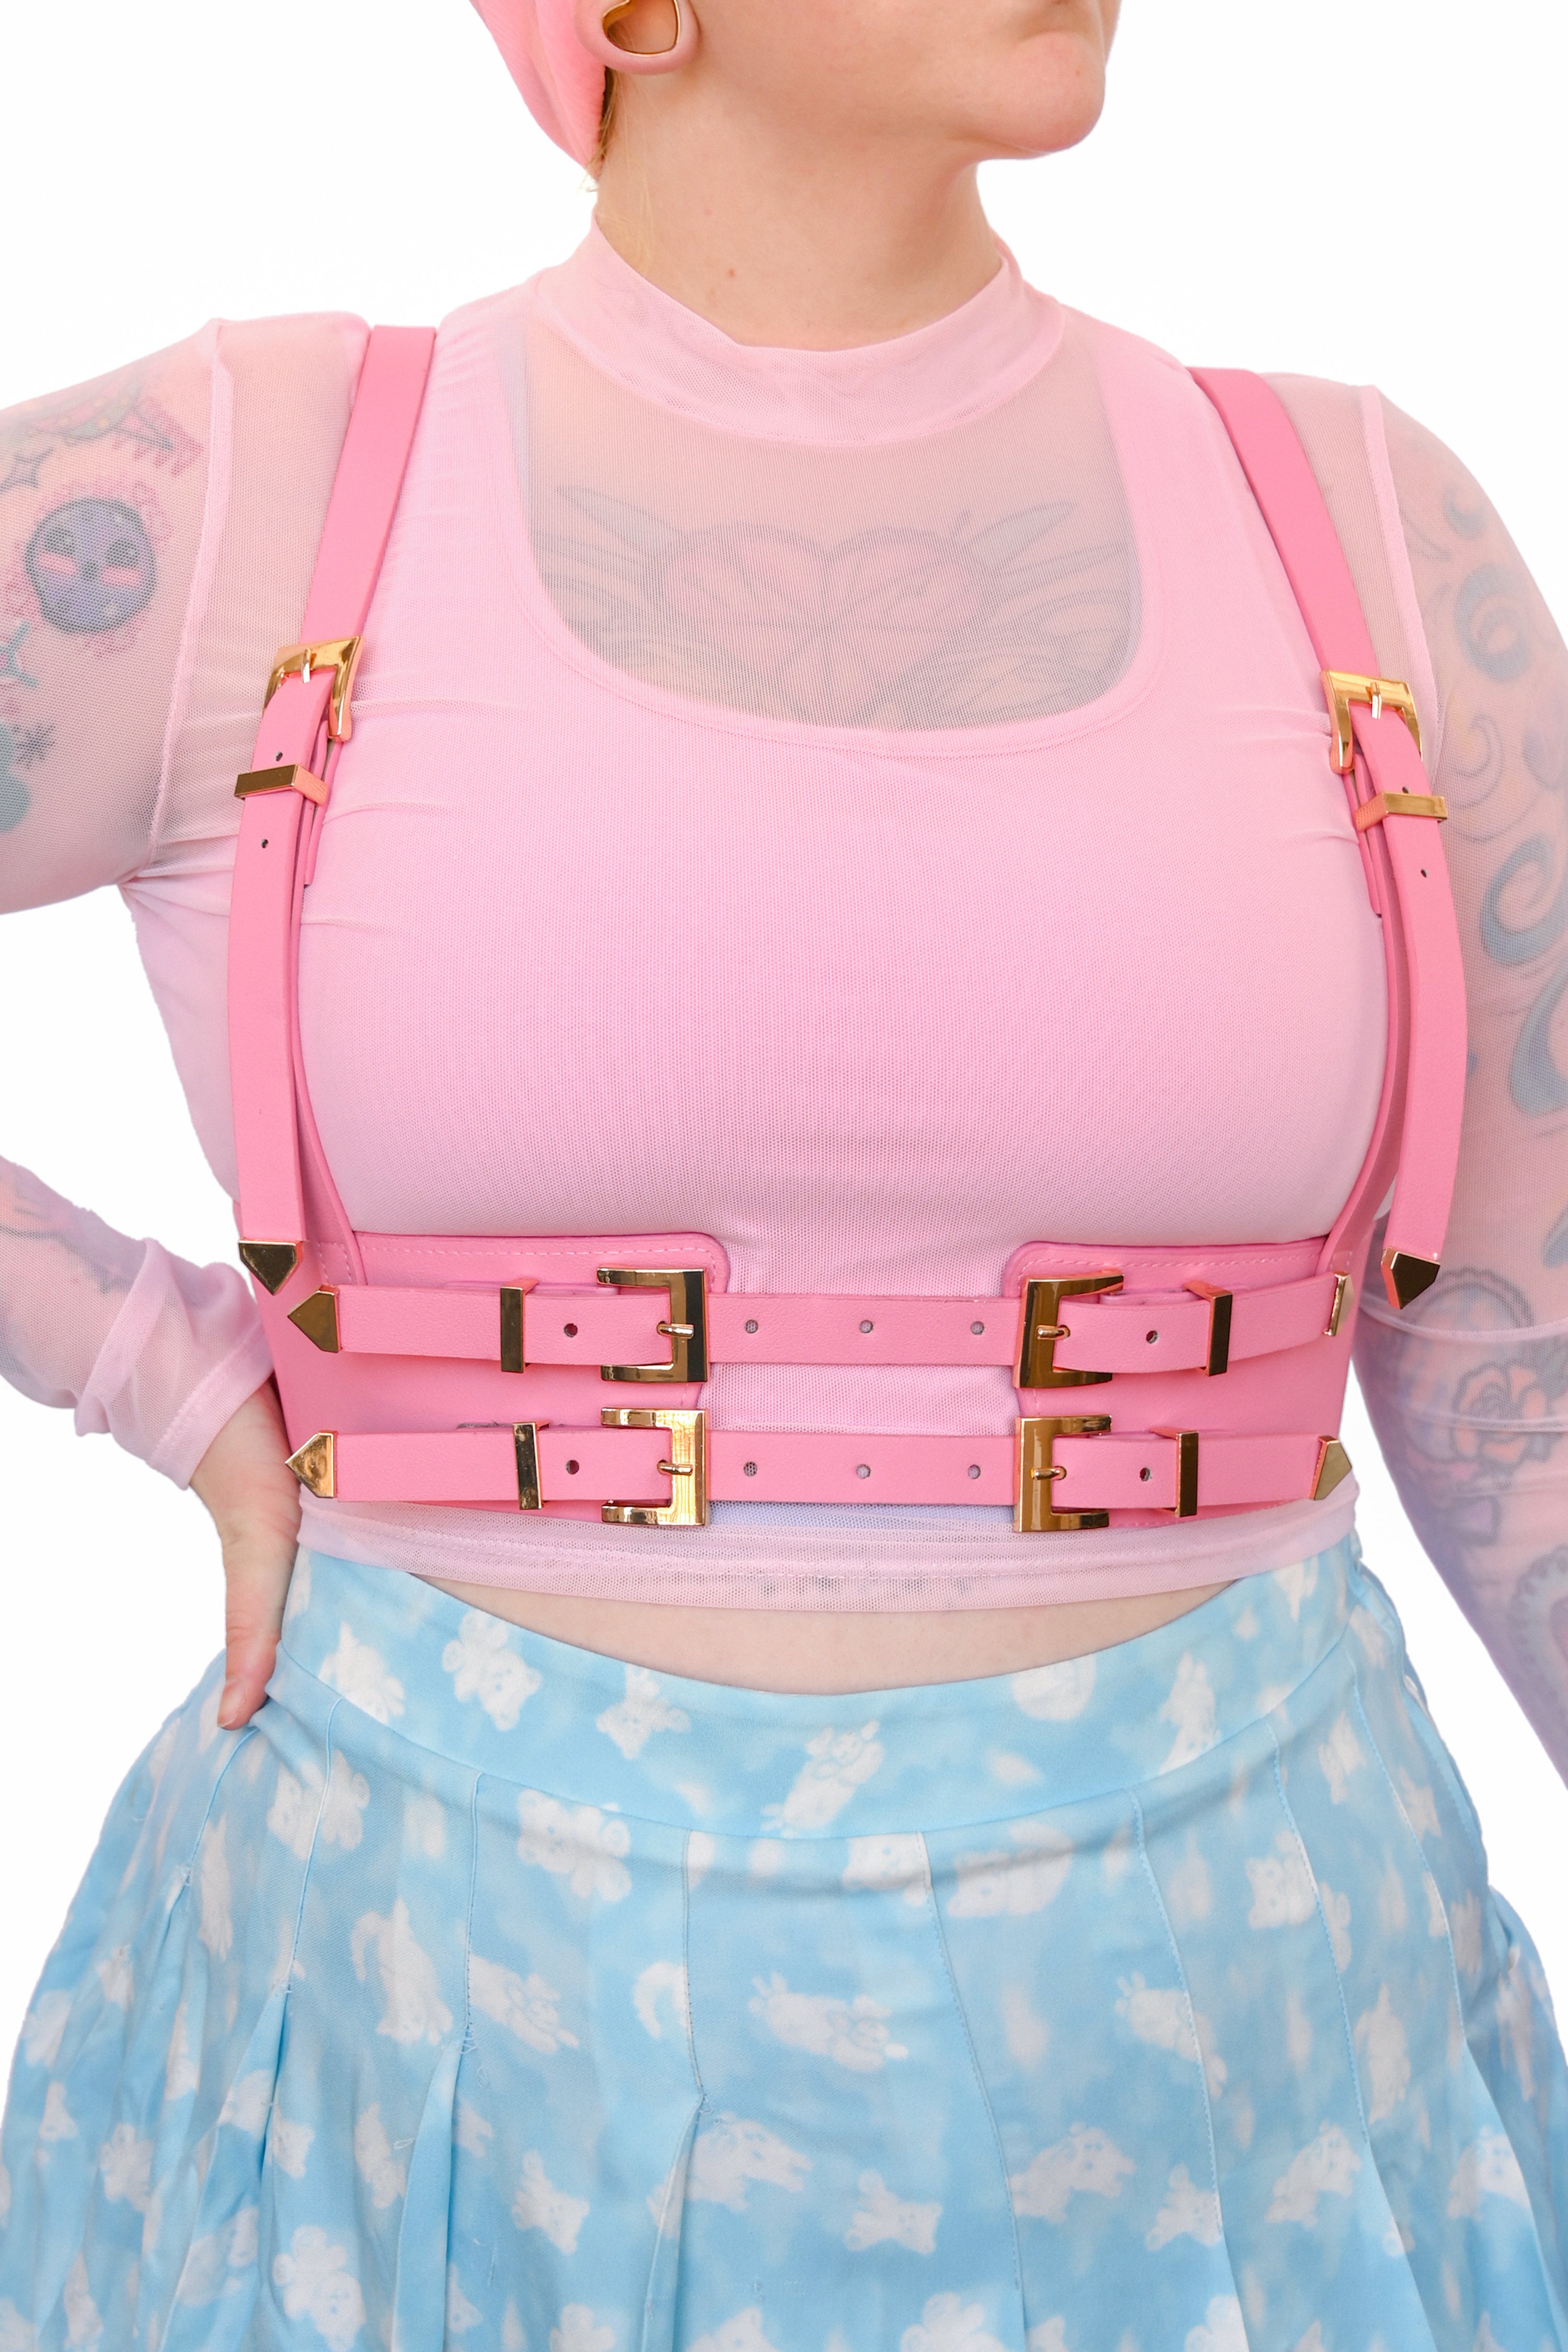 Pink fully adjustable vegan leather harness.  Elastic sides with fully adjustable front buckles and straps. Lots of stretch!